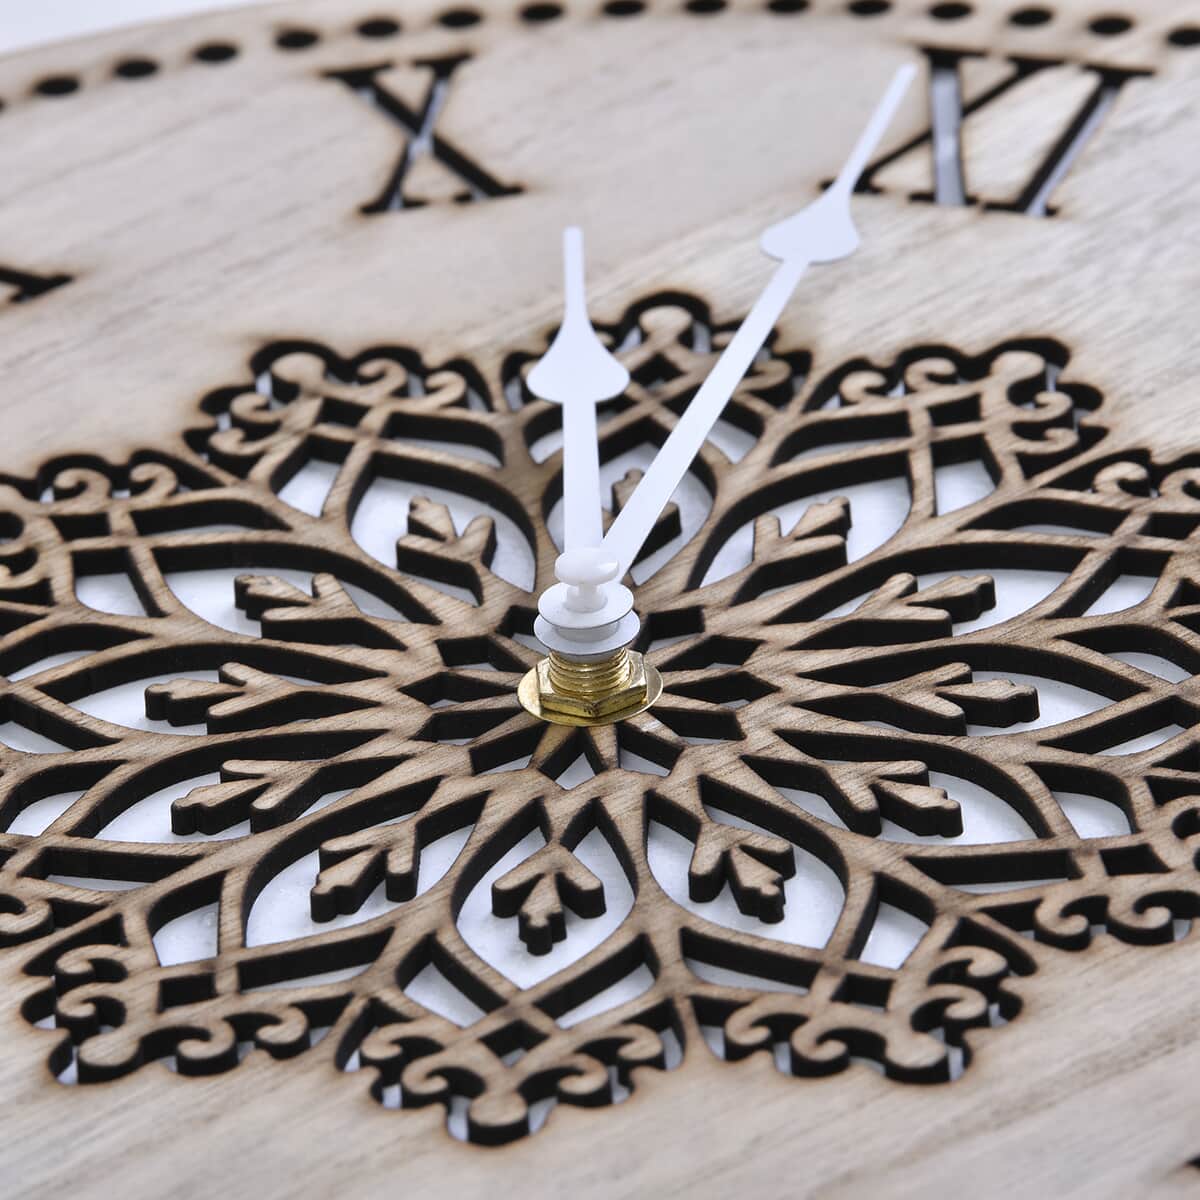 Wooden Quartz Sweep Movement Flower Pattern Wall Clock (11.81"x11.81") (AAx1 Not Included) image number 6